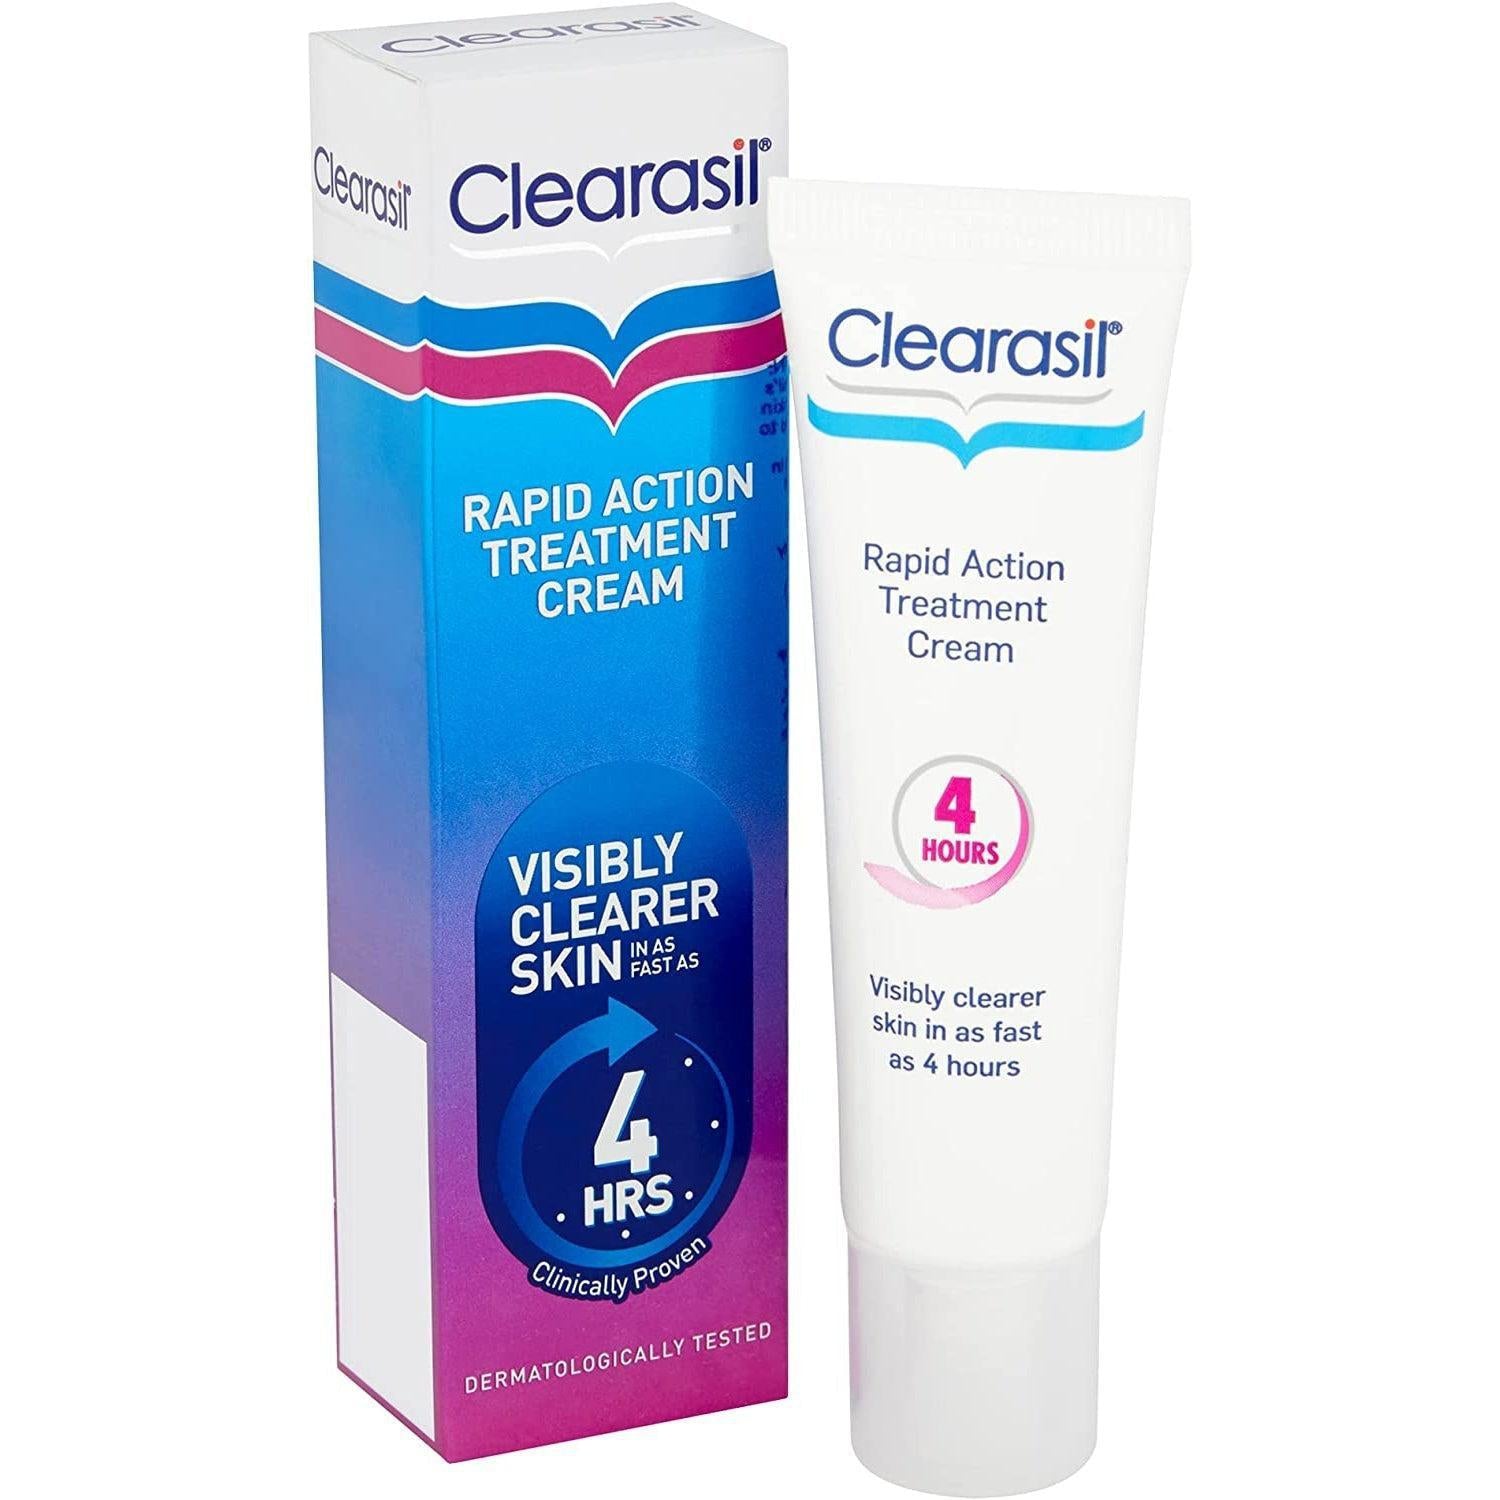 Clearasil Rapid Action Treatment Cream, Clinically Proven 25ml - Healthxpress.ie